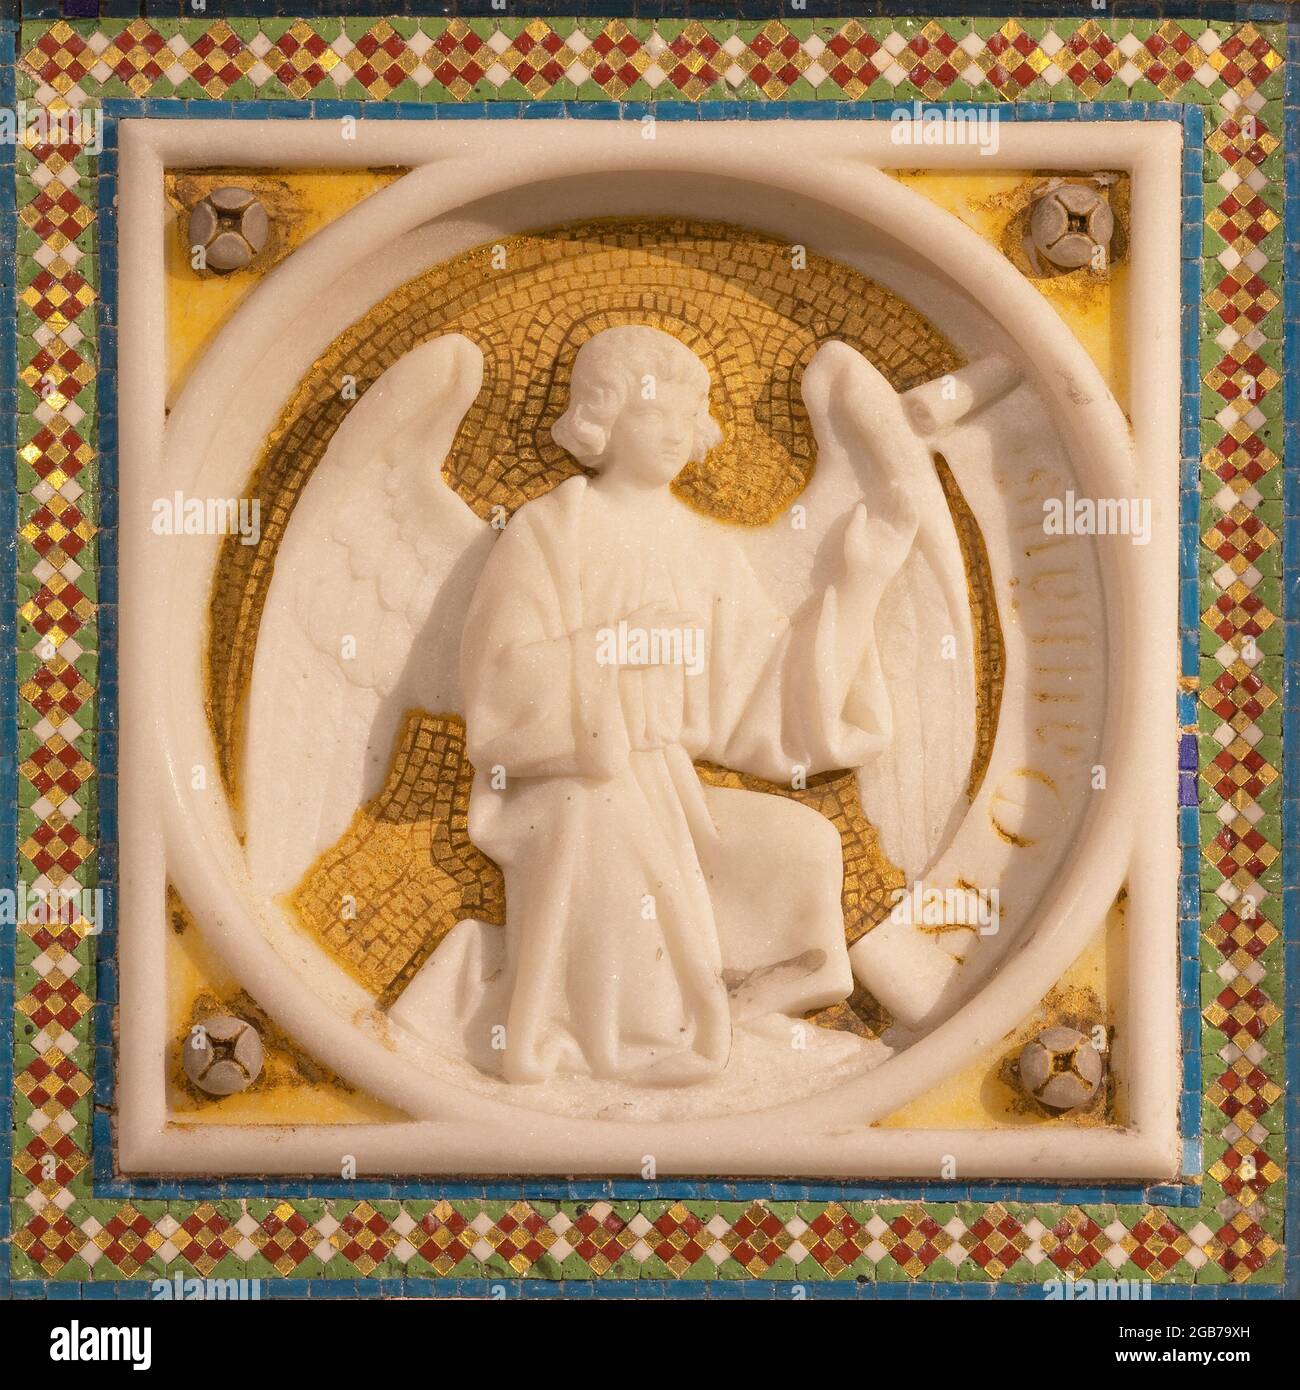 VIENNA, AUSTIRA - JUNI 24, 2021: The relief of angel as the symbol of St. Matthew the Evangelist on the sidealtar of Votivkirche cathedral from 19. ce Stock Photo